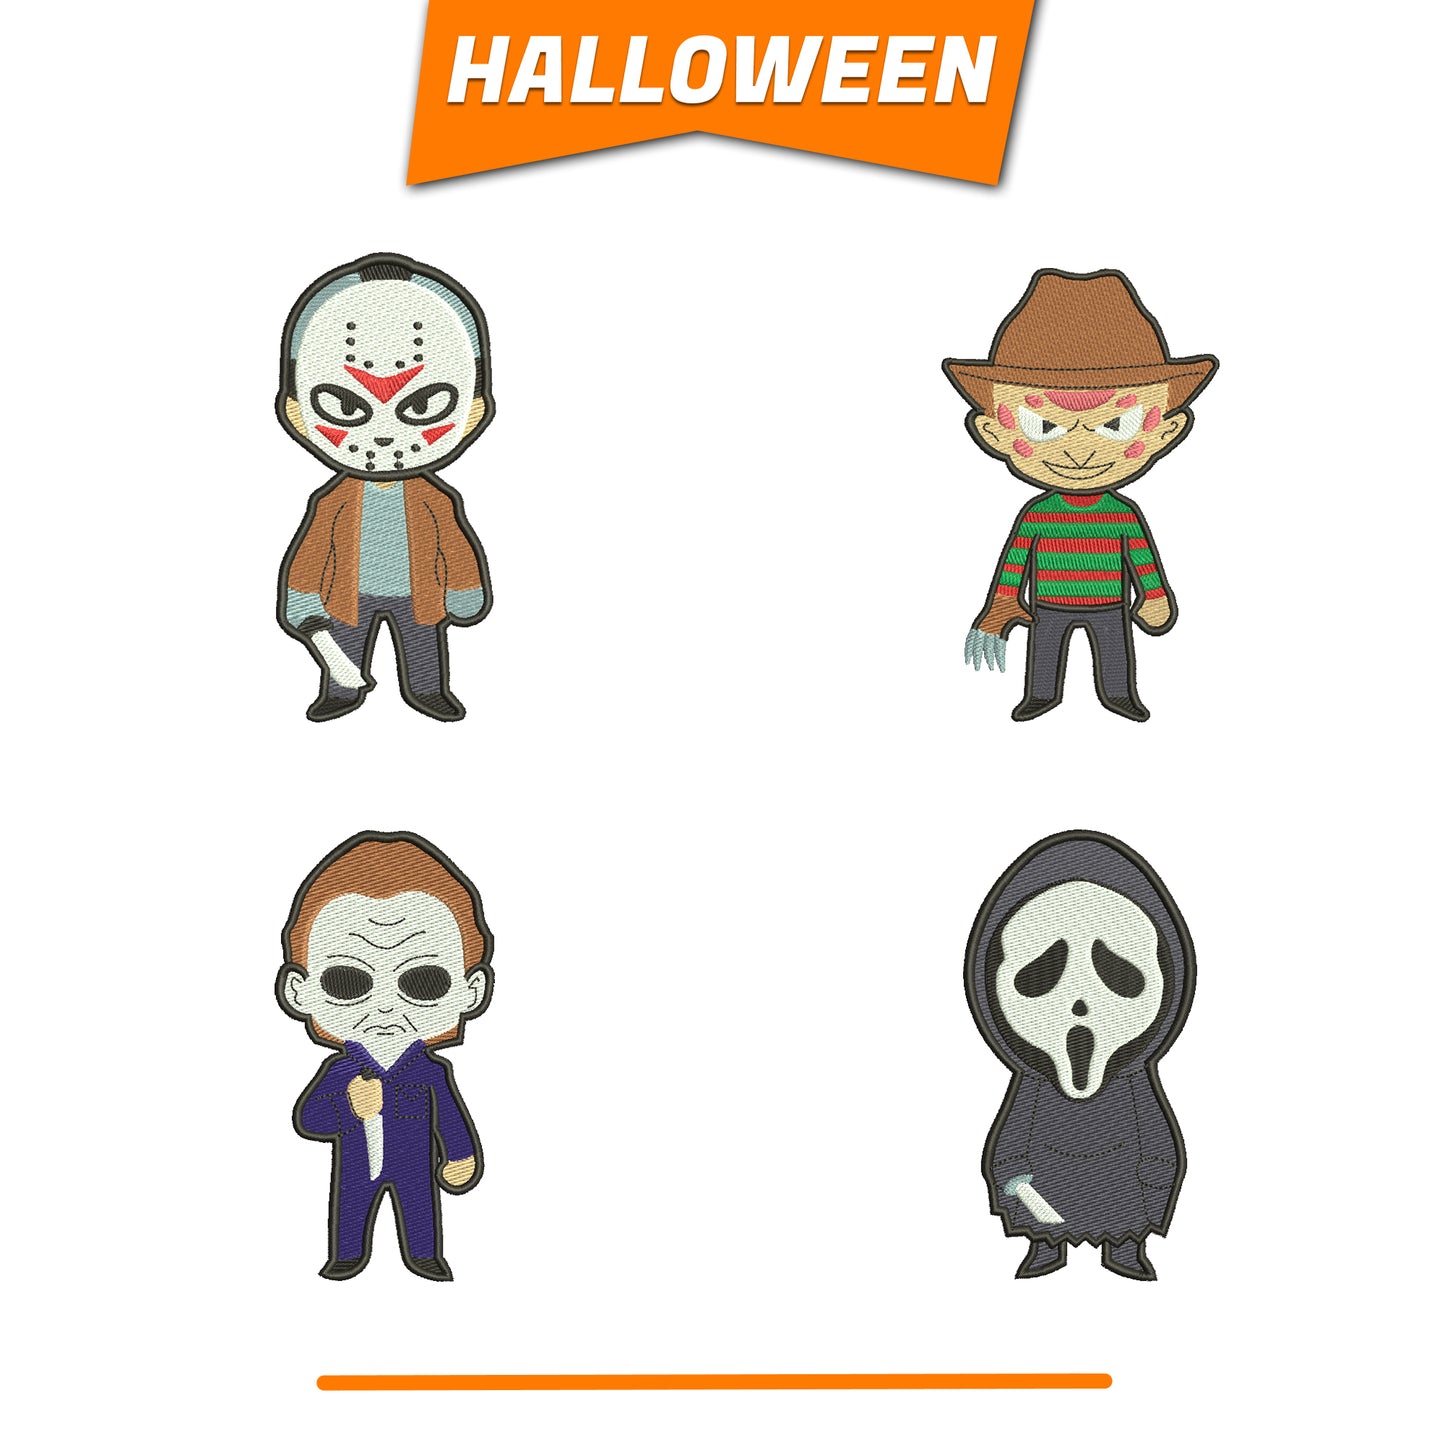 Horror characters embroidery bundle halloween embroidery files